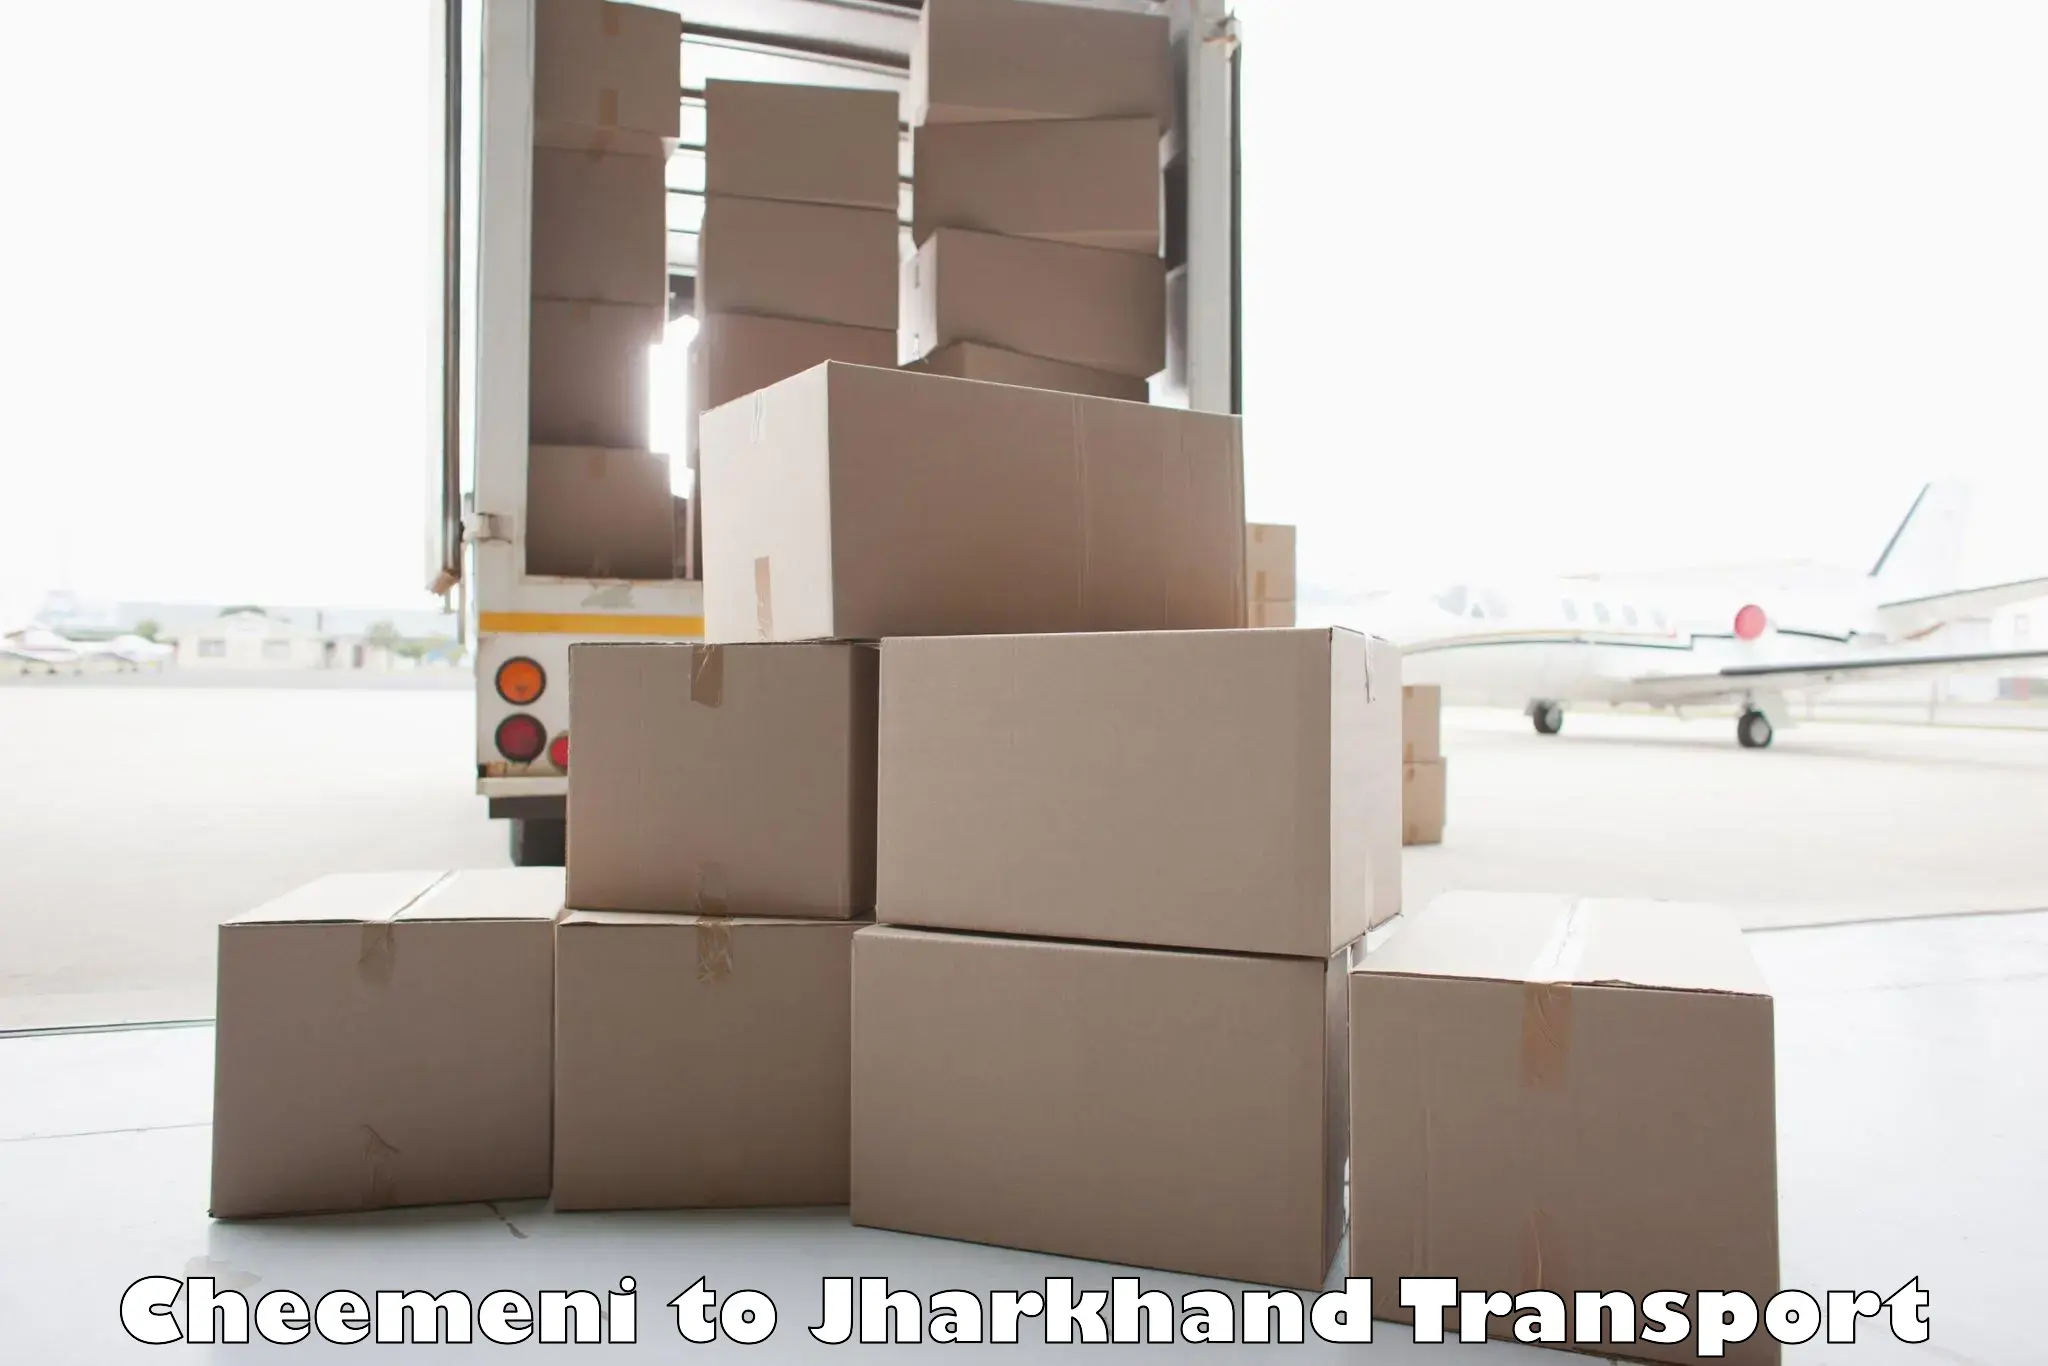 Air freight transport services in Cheemeni to Jharkhand